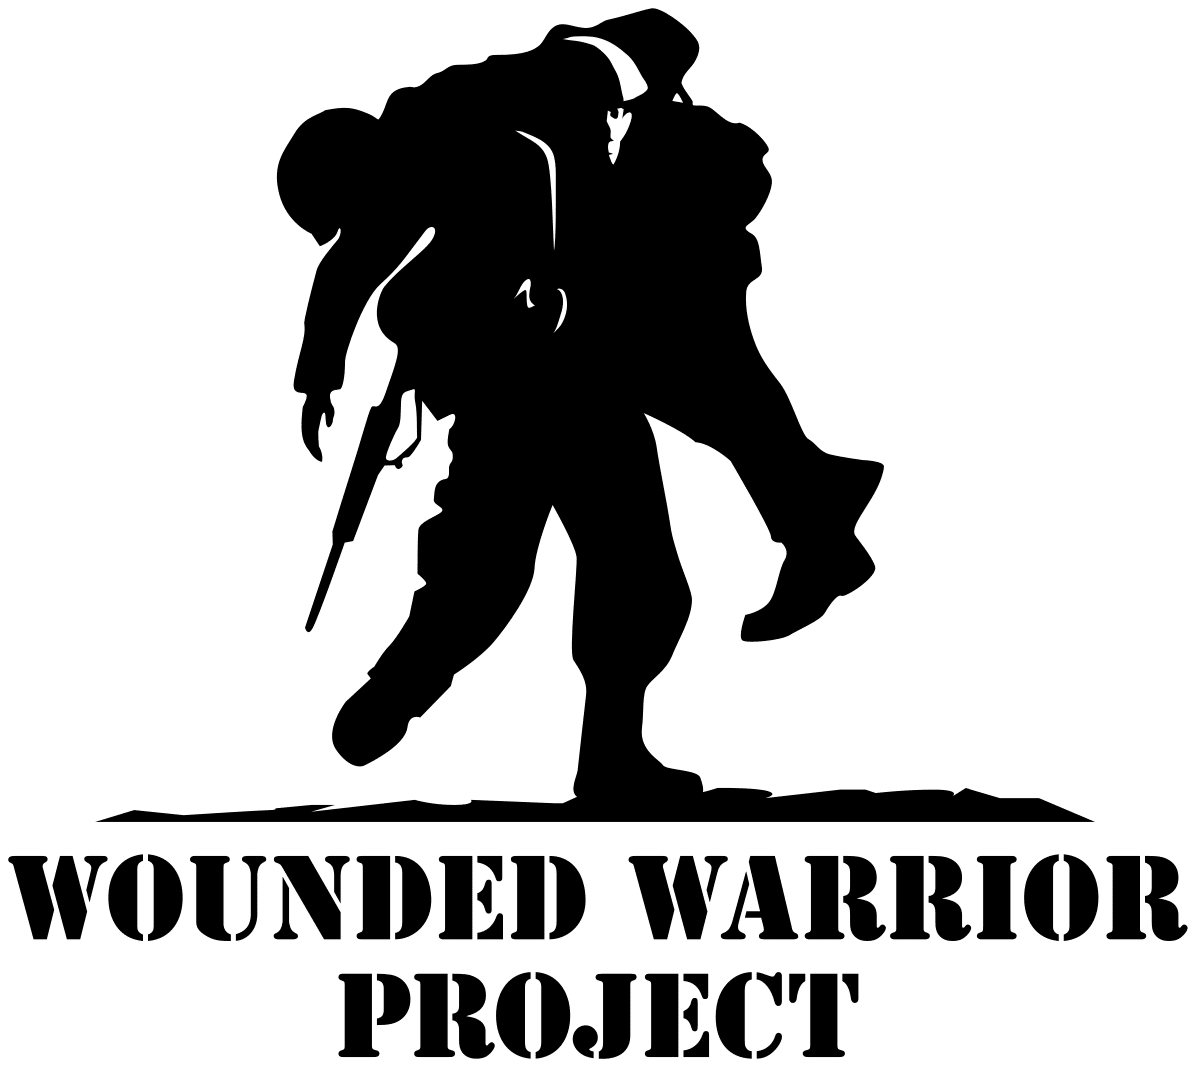 Wounded Warrior Project contribution